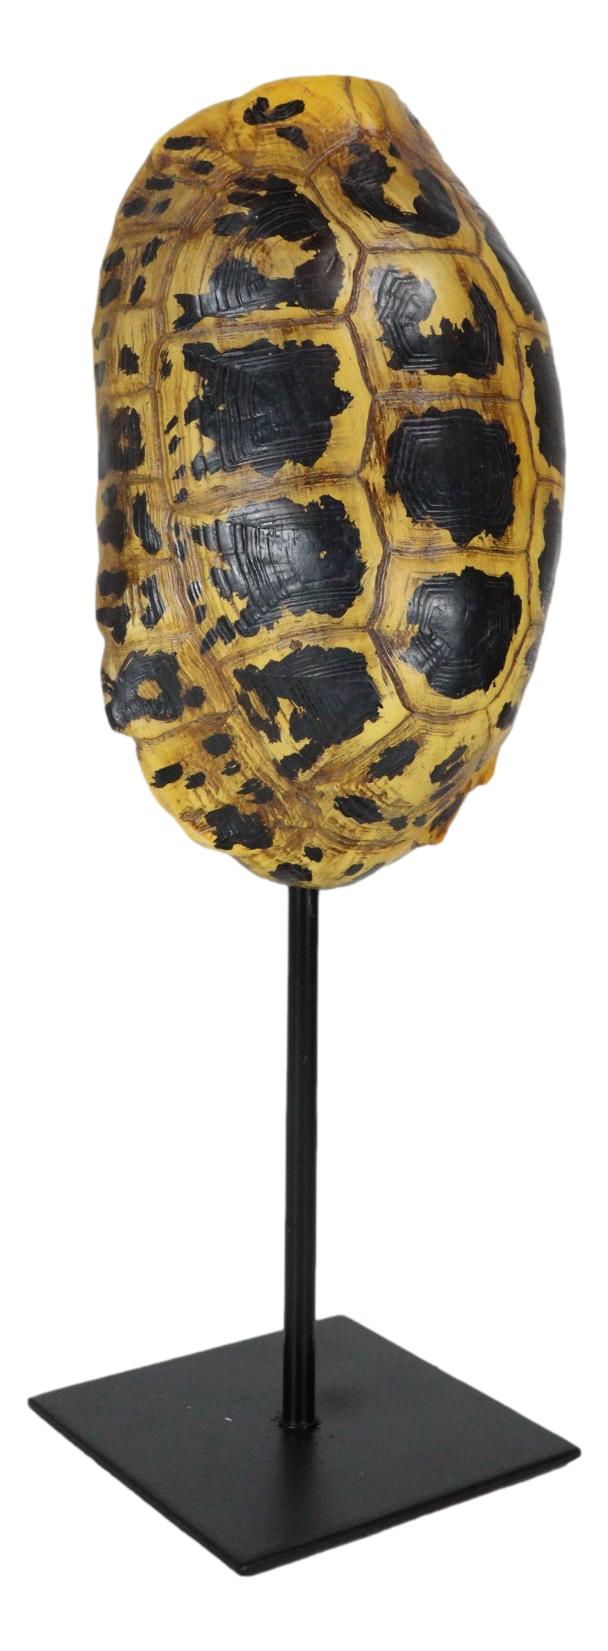 Nautical Reptile Yellow Elongated Tortoise Shell Sculpture On Museum Art Stand